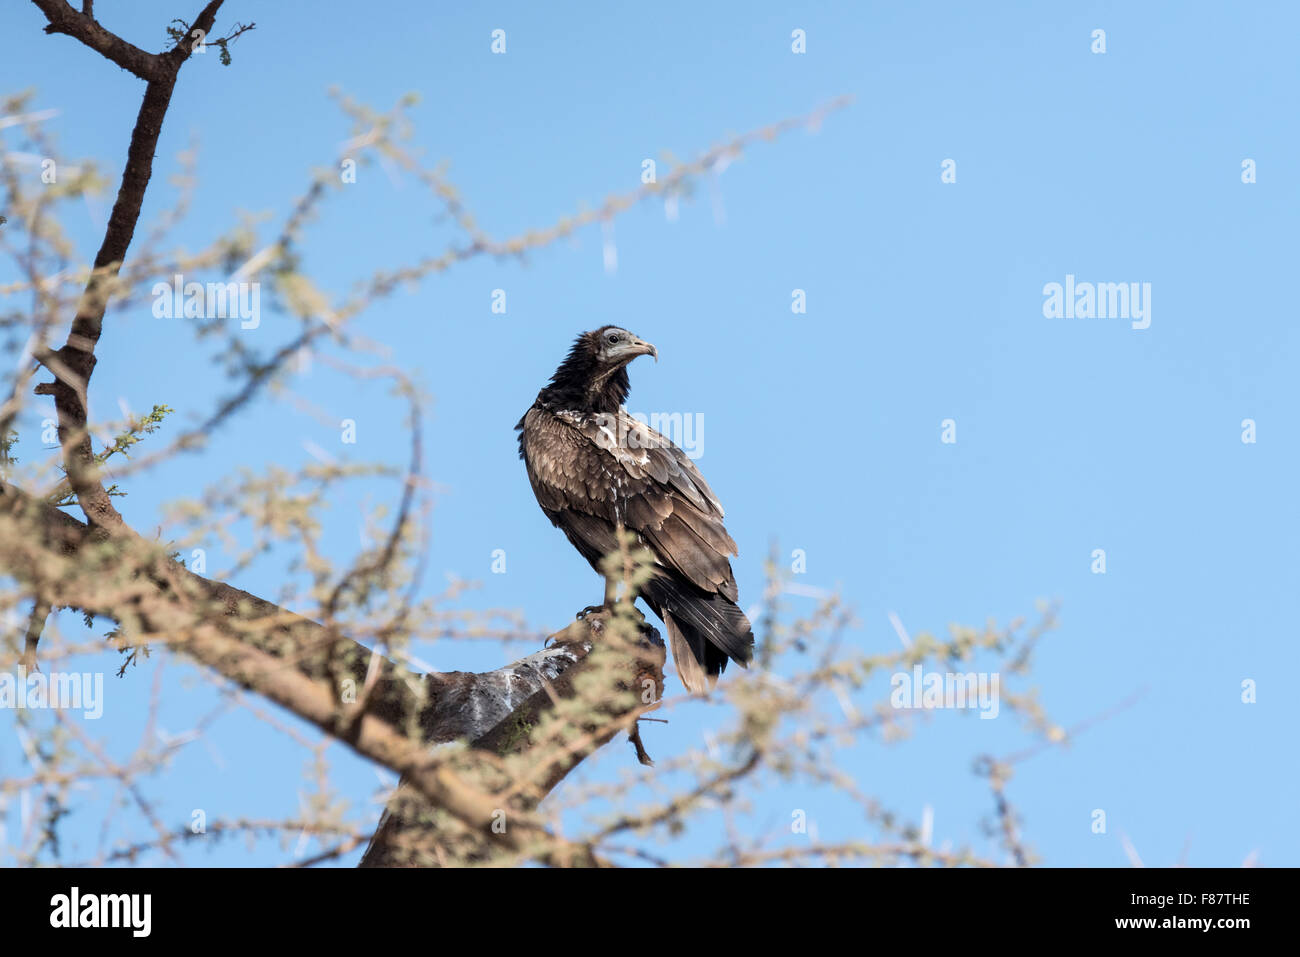 A juvenile Egyptian vulture perched in a tree Stock Photo